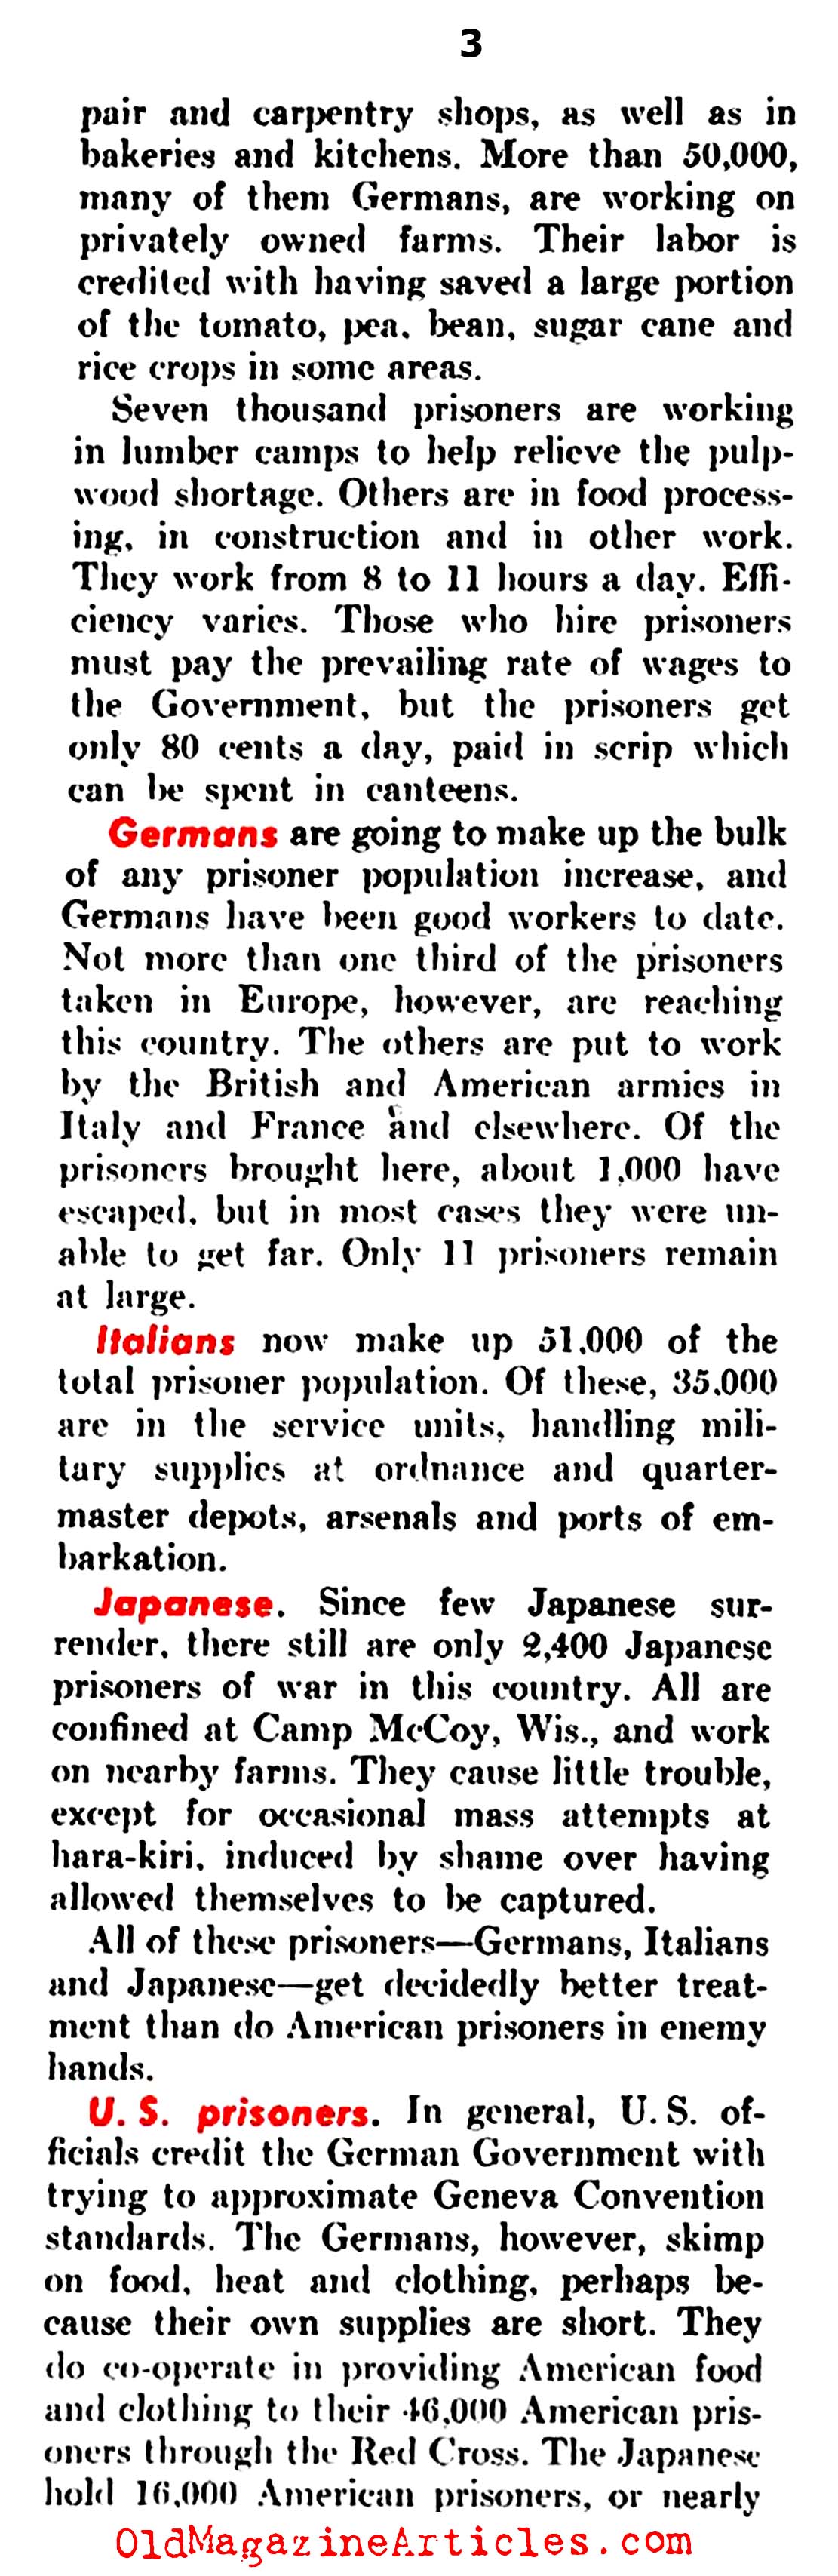 German and Italian P.o.W.s in America (United States News, 1945)